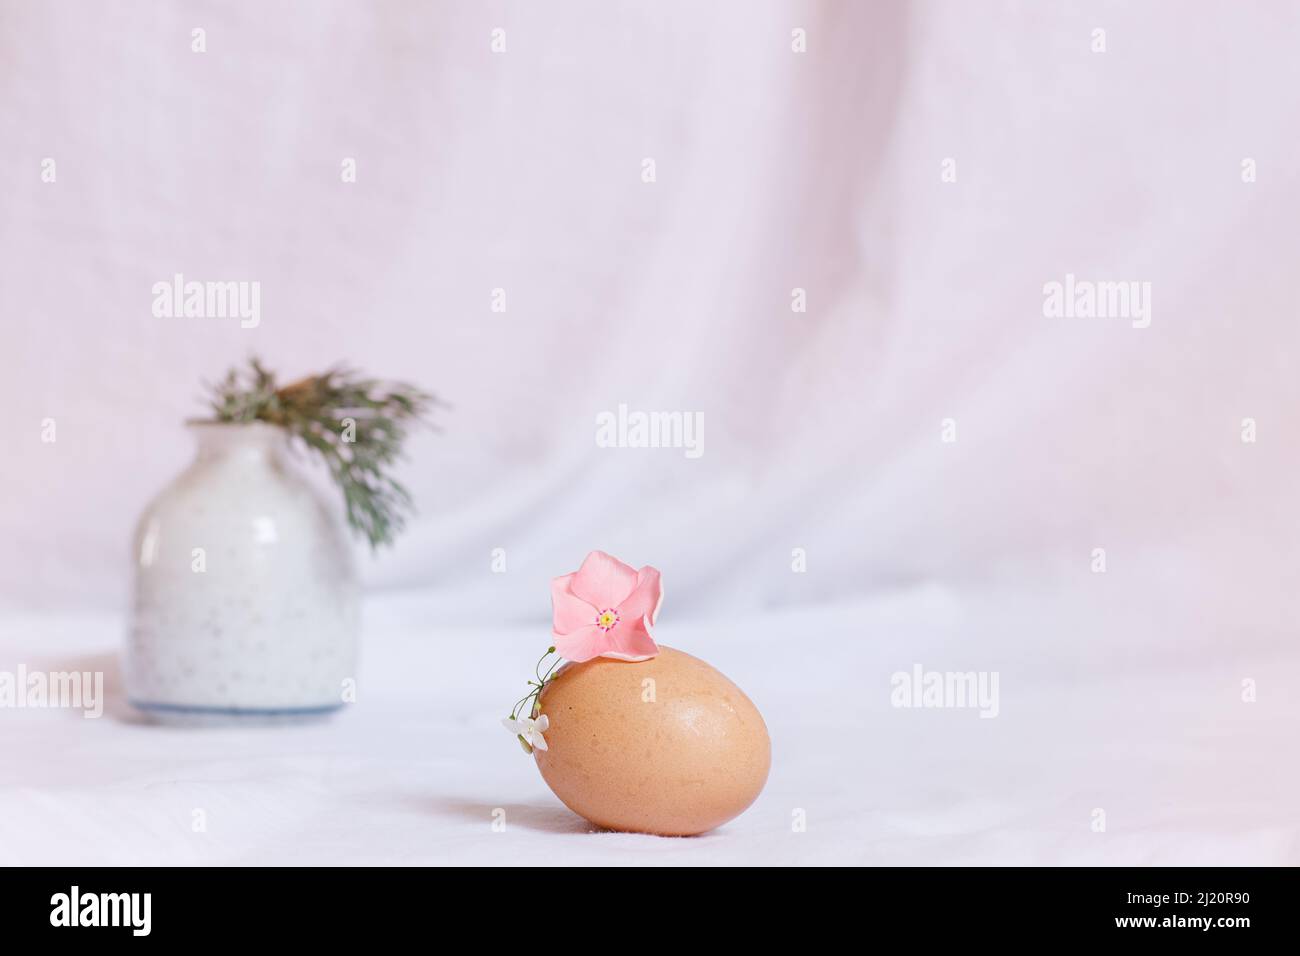 Bright and airy Easter aesthetic still life that conveys the fresh and gentle feelings of Spring season Stock Photo